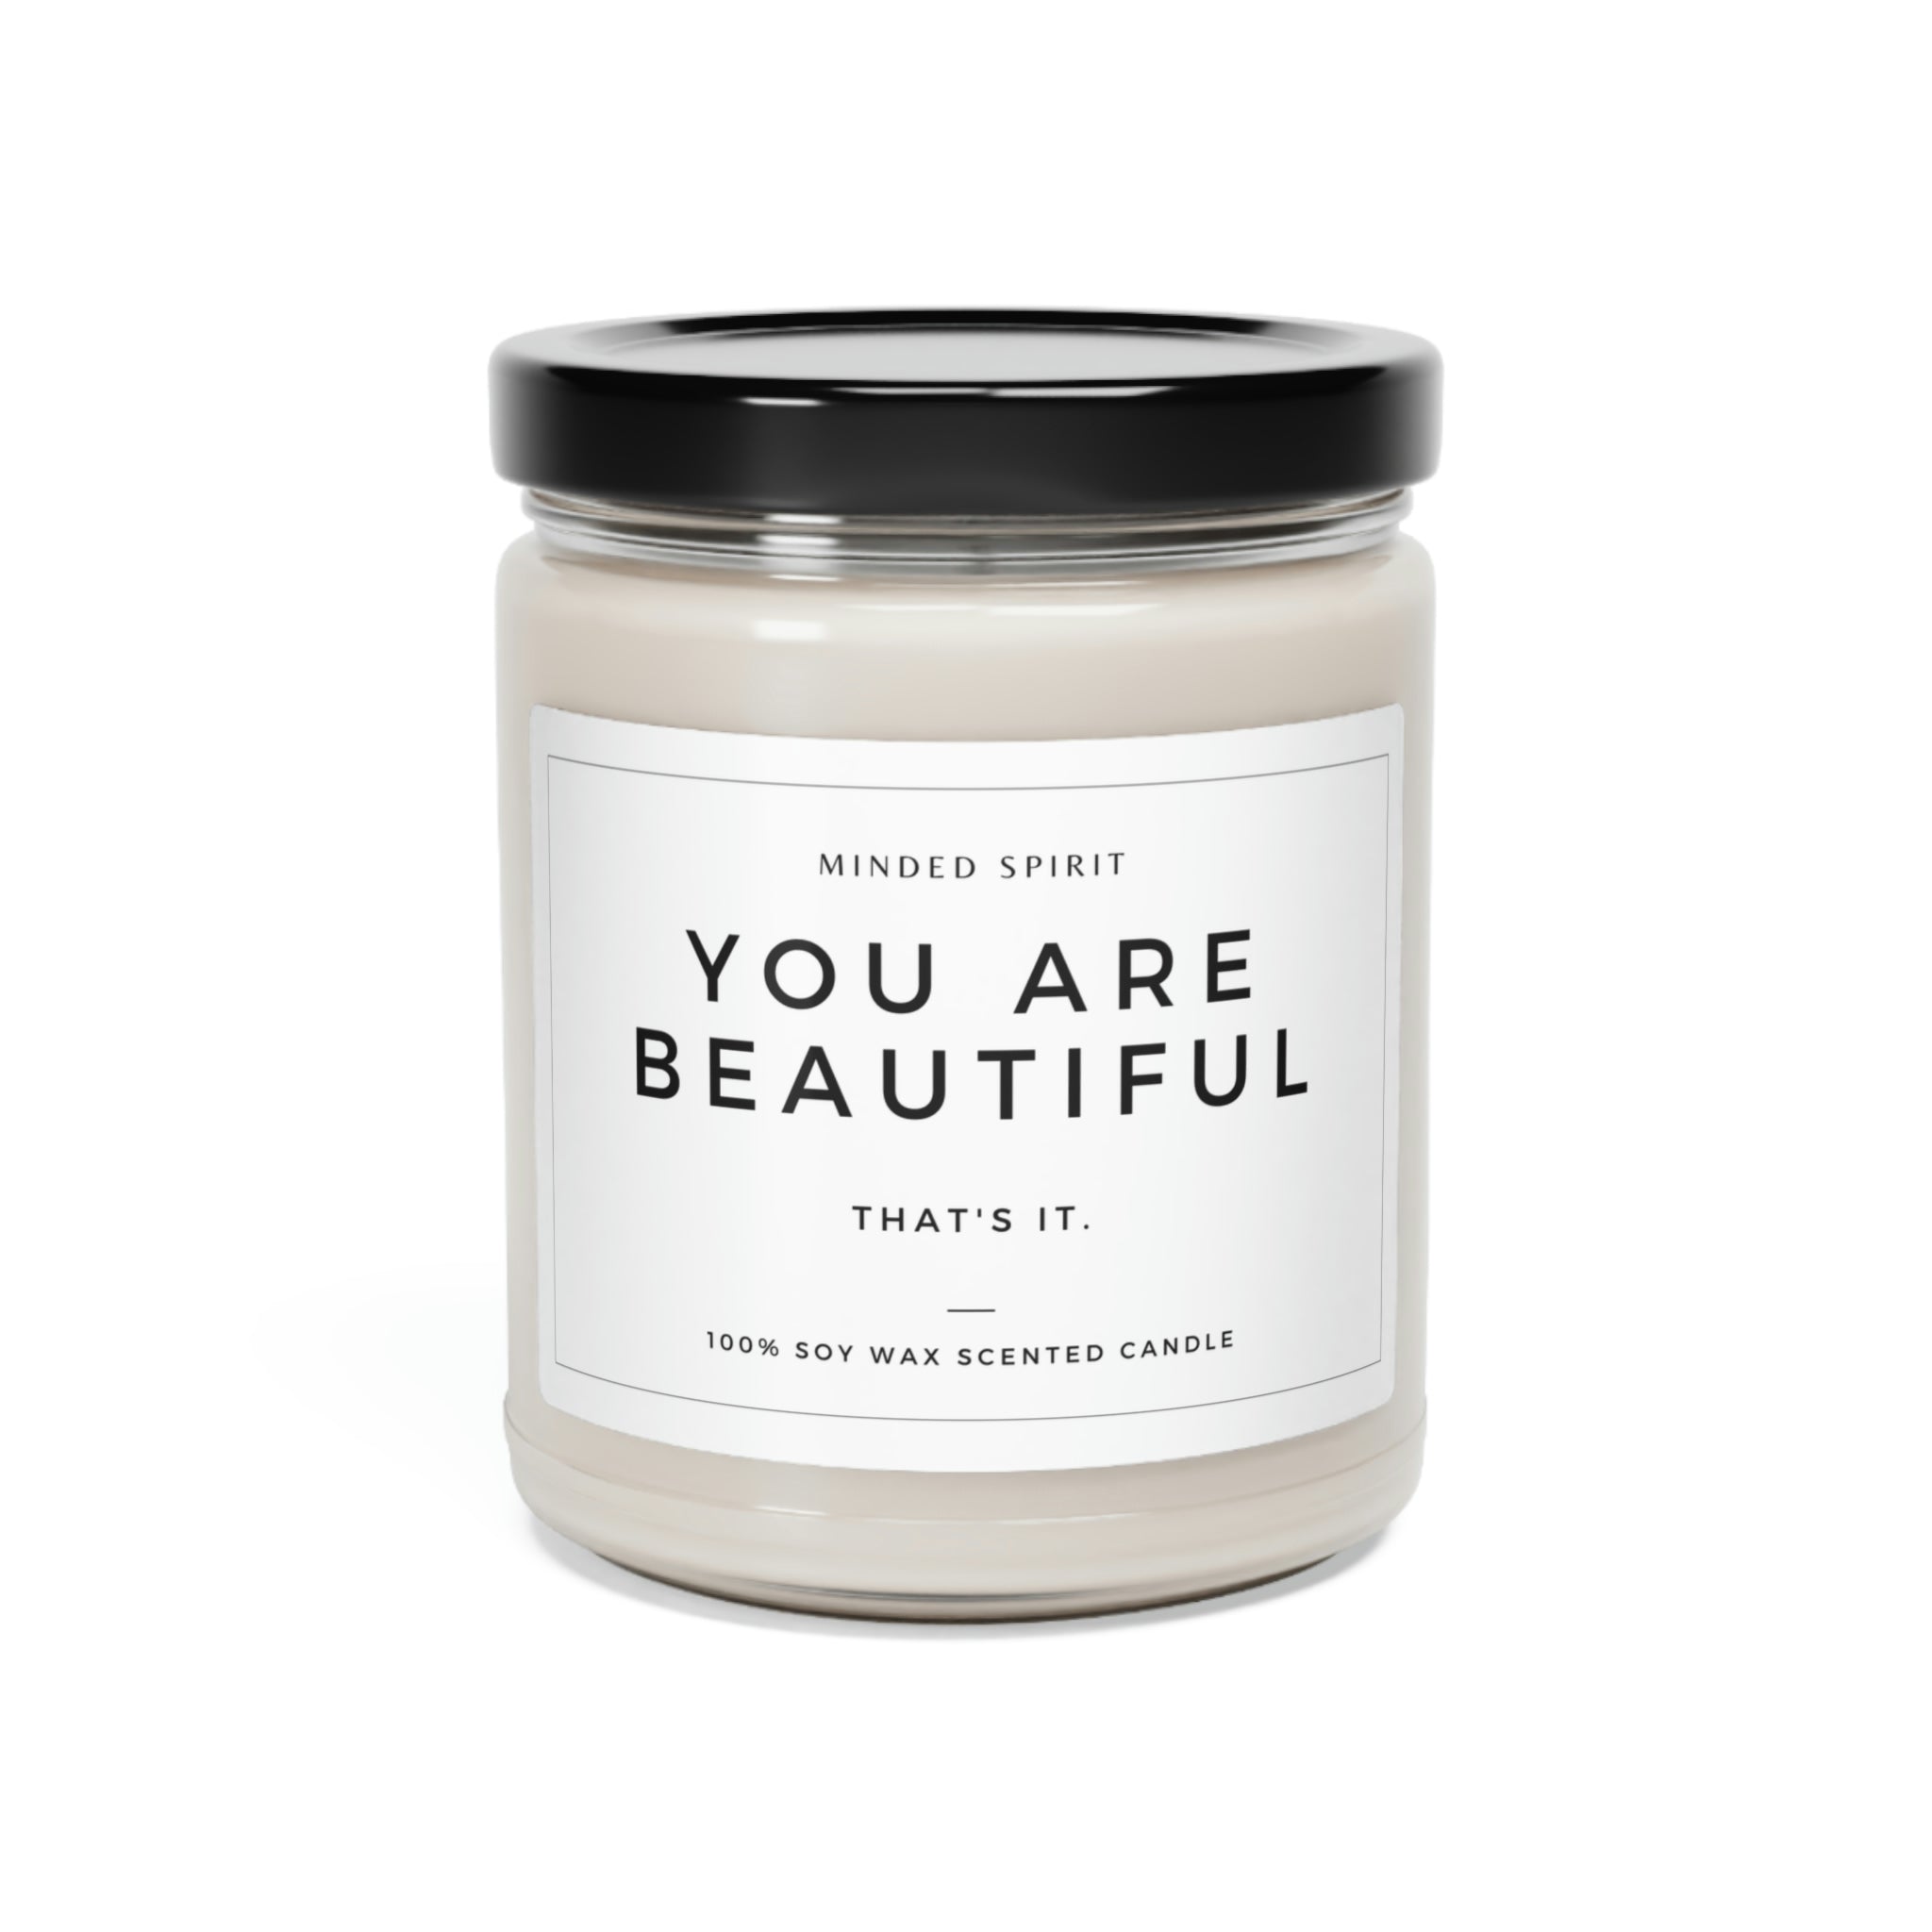 You Are Beautiful Sassy Self-Help Scented Candle